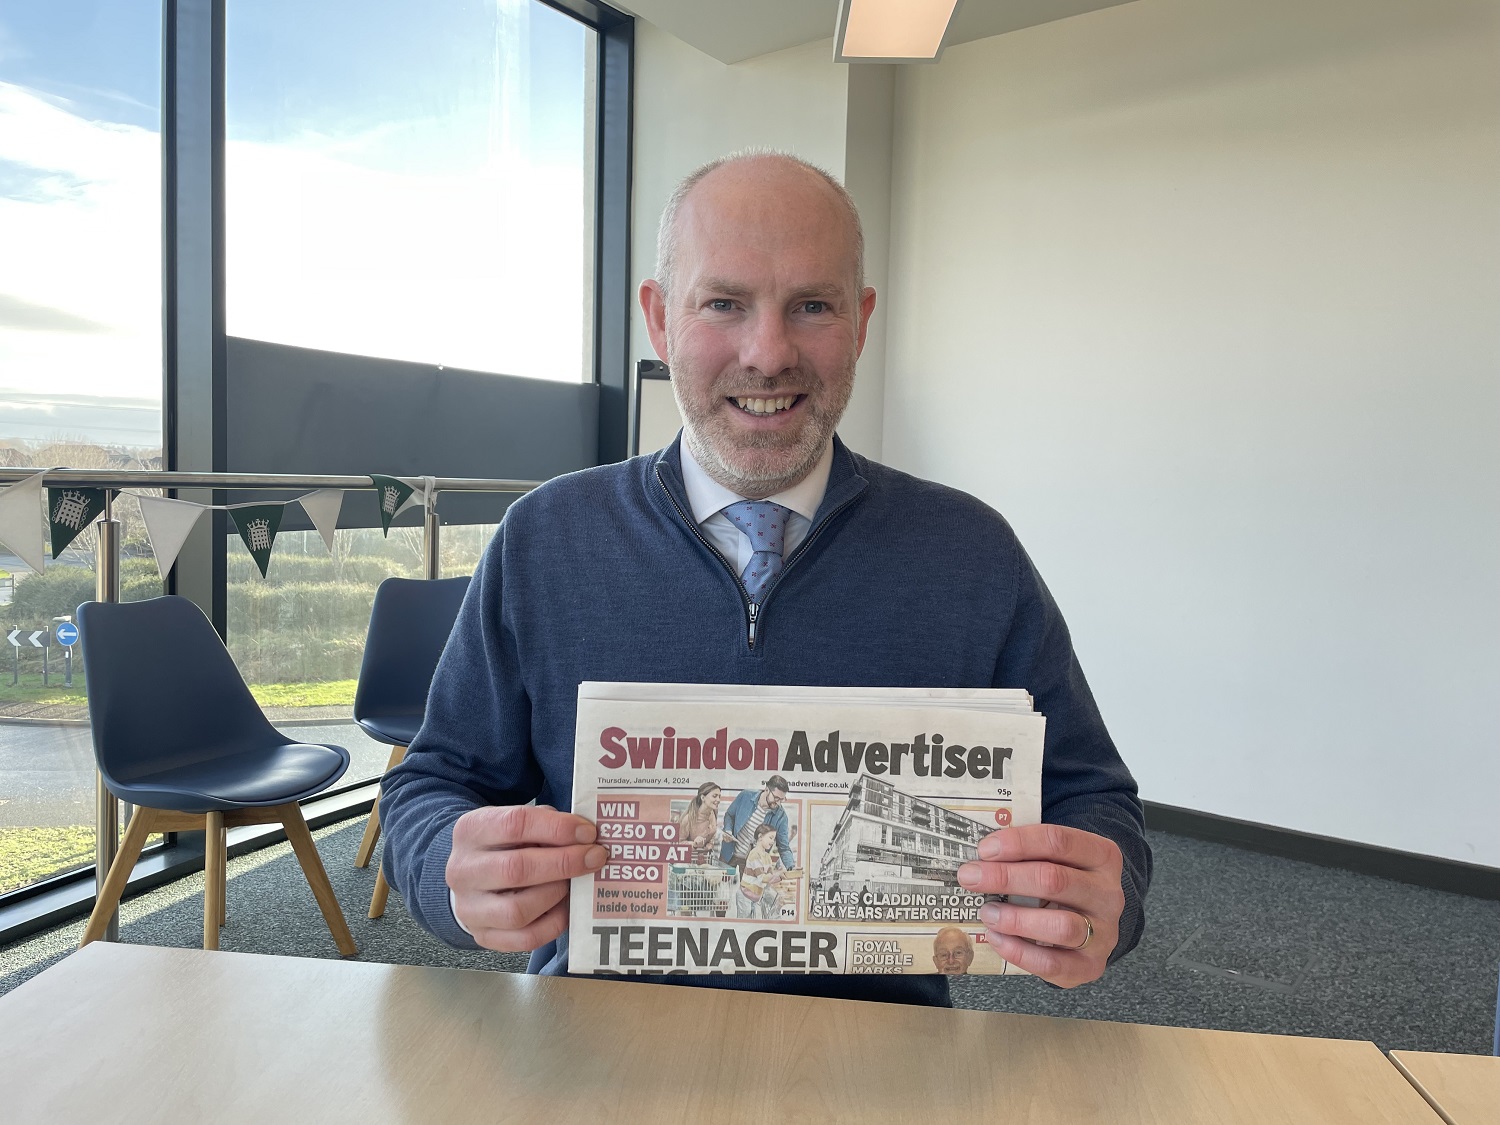 Swindon Advertiser Column - Very Proud To Accept Important Role